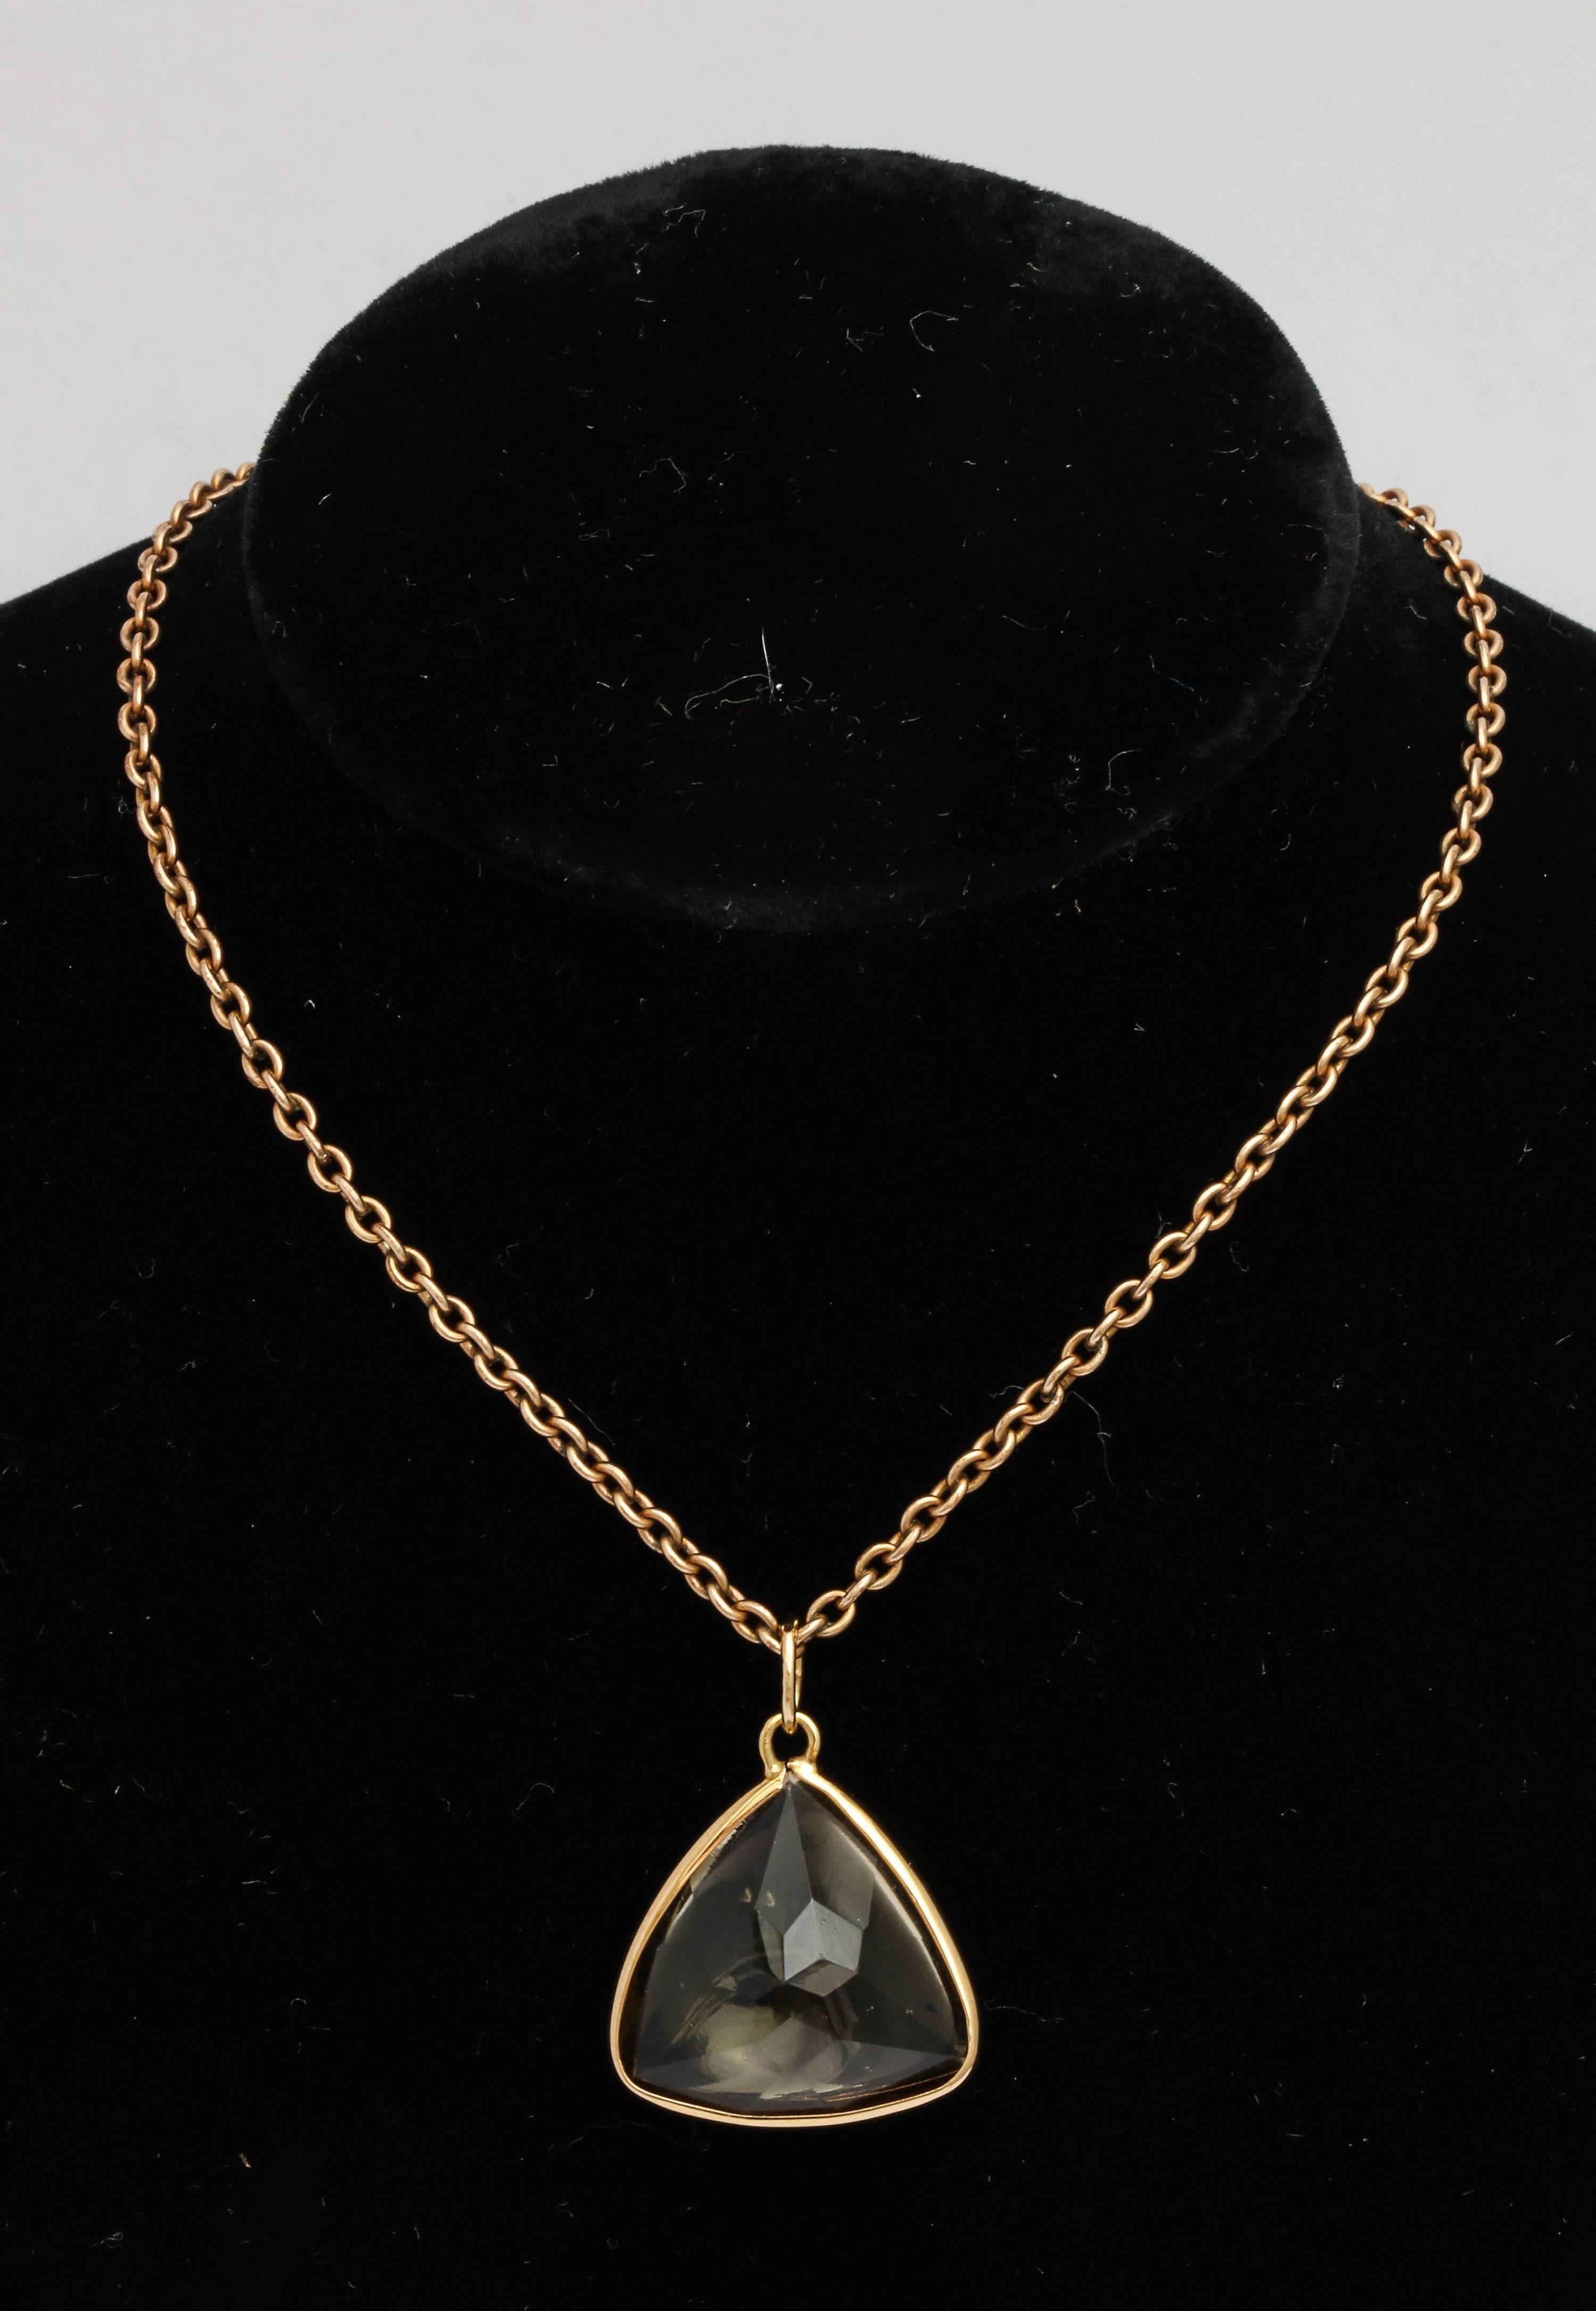 A buff-topped triangular-cut smokey quartz with a faceted reverse, bezel set in yellow gold with gold suspension ring.  Chain not included. 

20th century. 

Pendant measures ¾ in. (1.9 cm.) from one corner to the next.  Quartz measures 8.7 mm deep. 